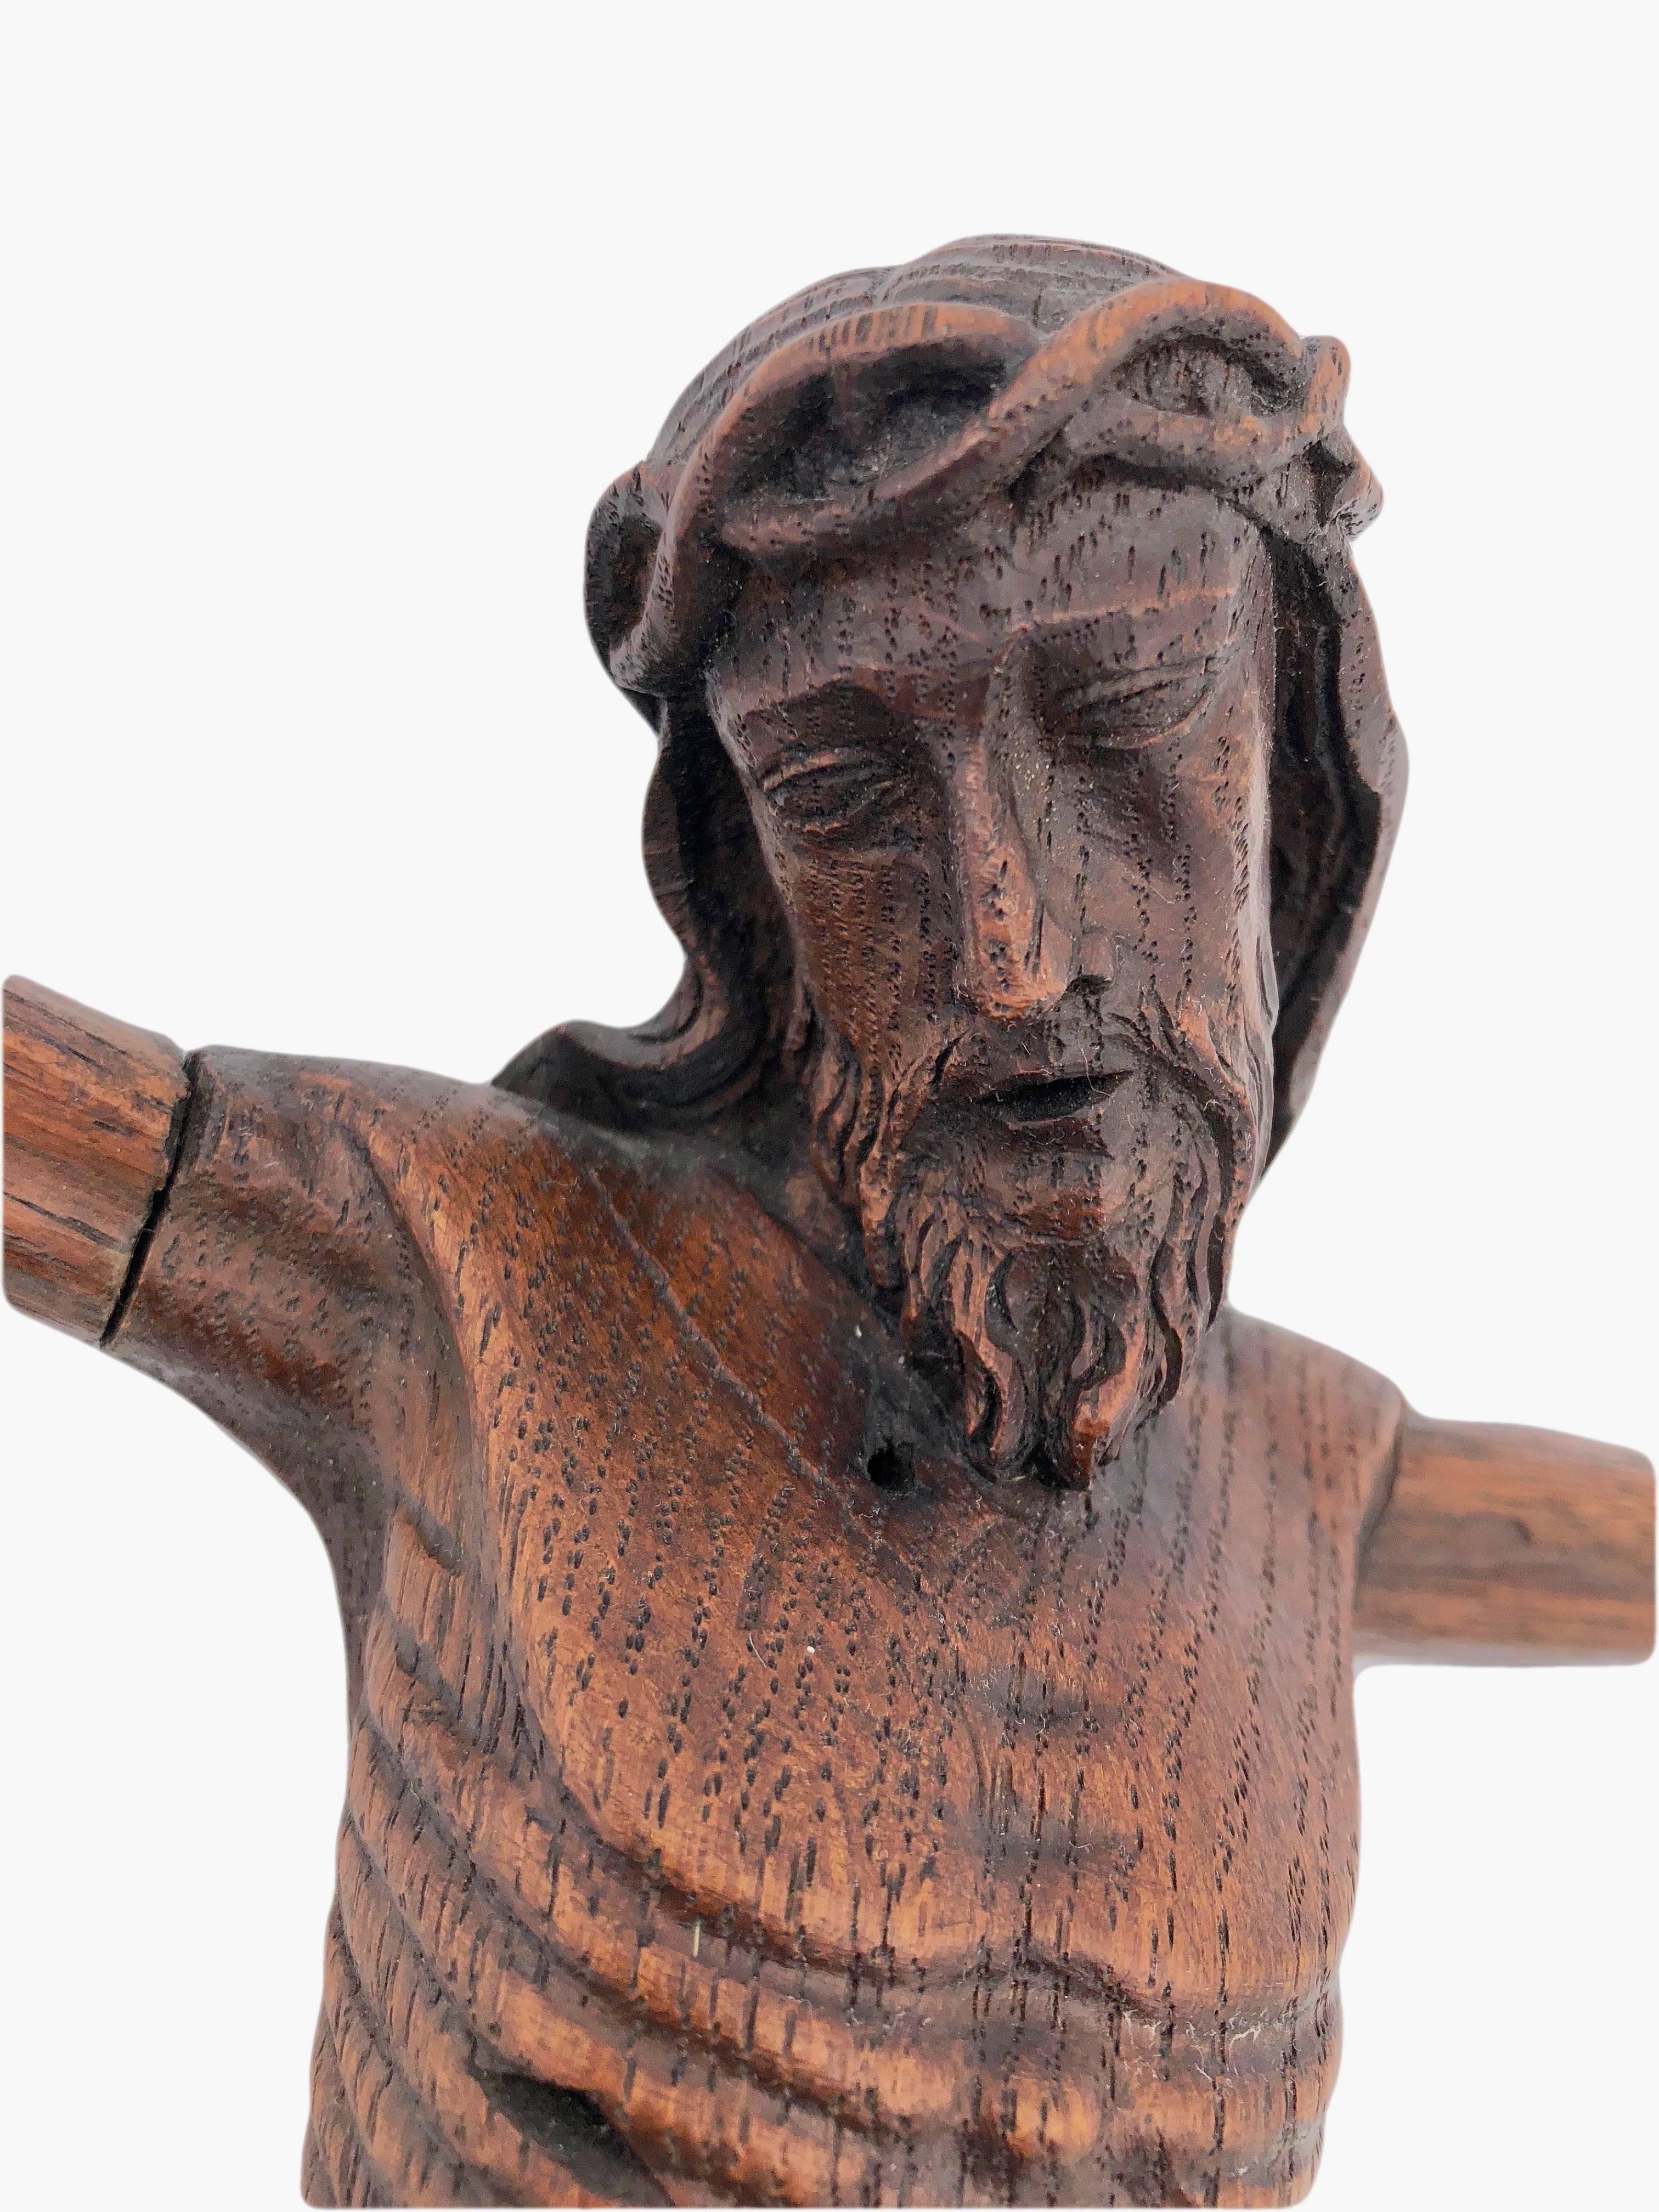 This is a rare early 1800s stunningly hand carved French wooden Christ. The detail and artistry are amazing. The hands have 2 fingers outstretched and two folded which may apply to the Orthodox religion since believers make the sign of the cross